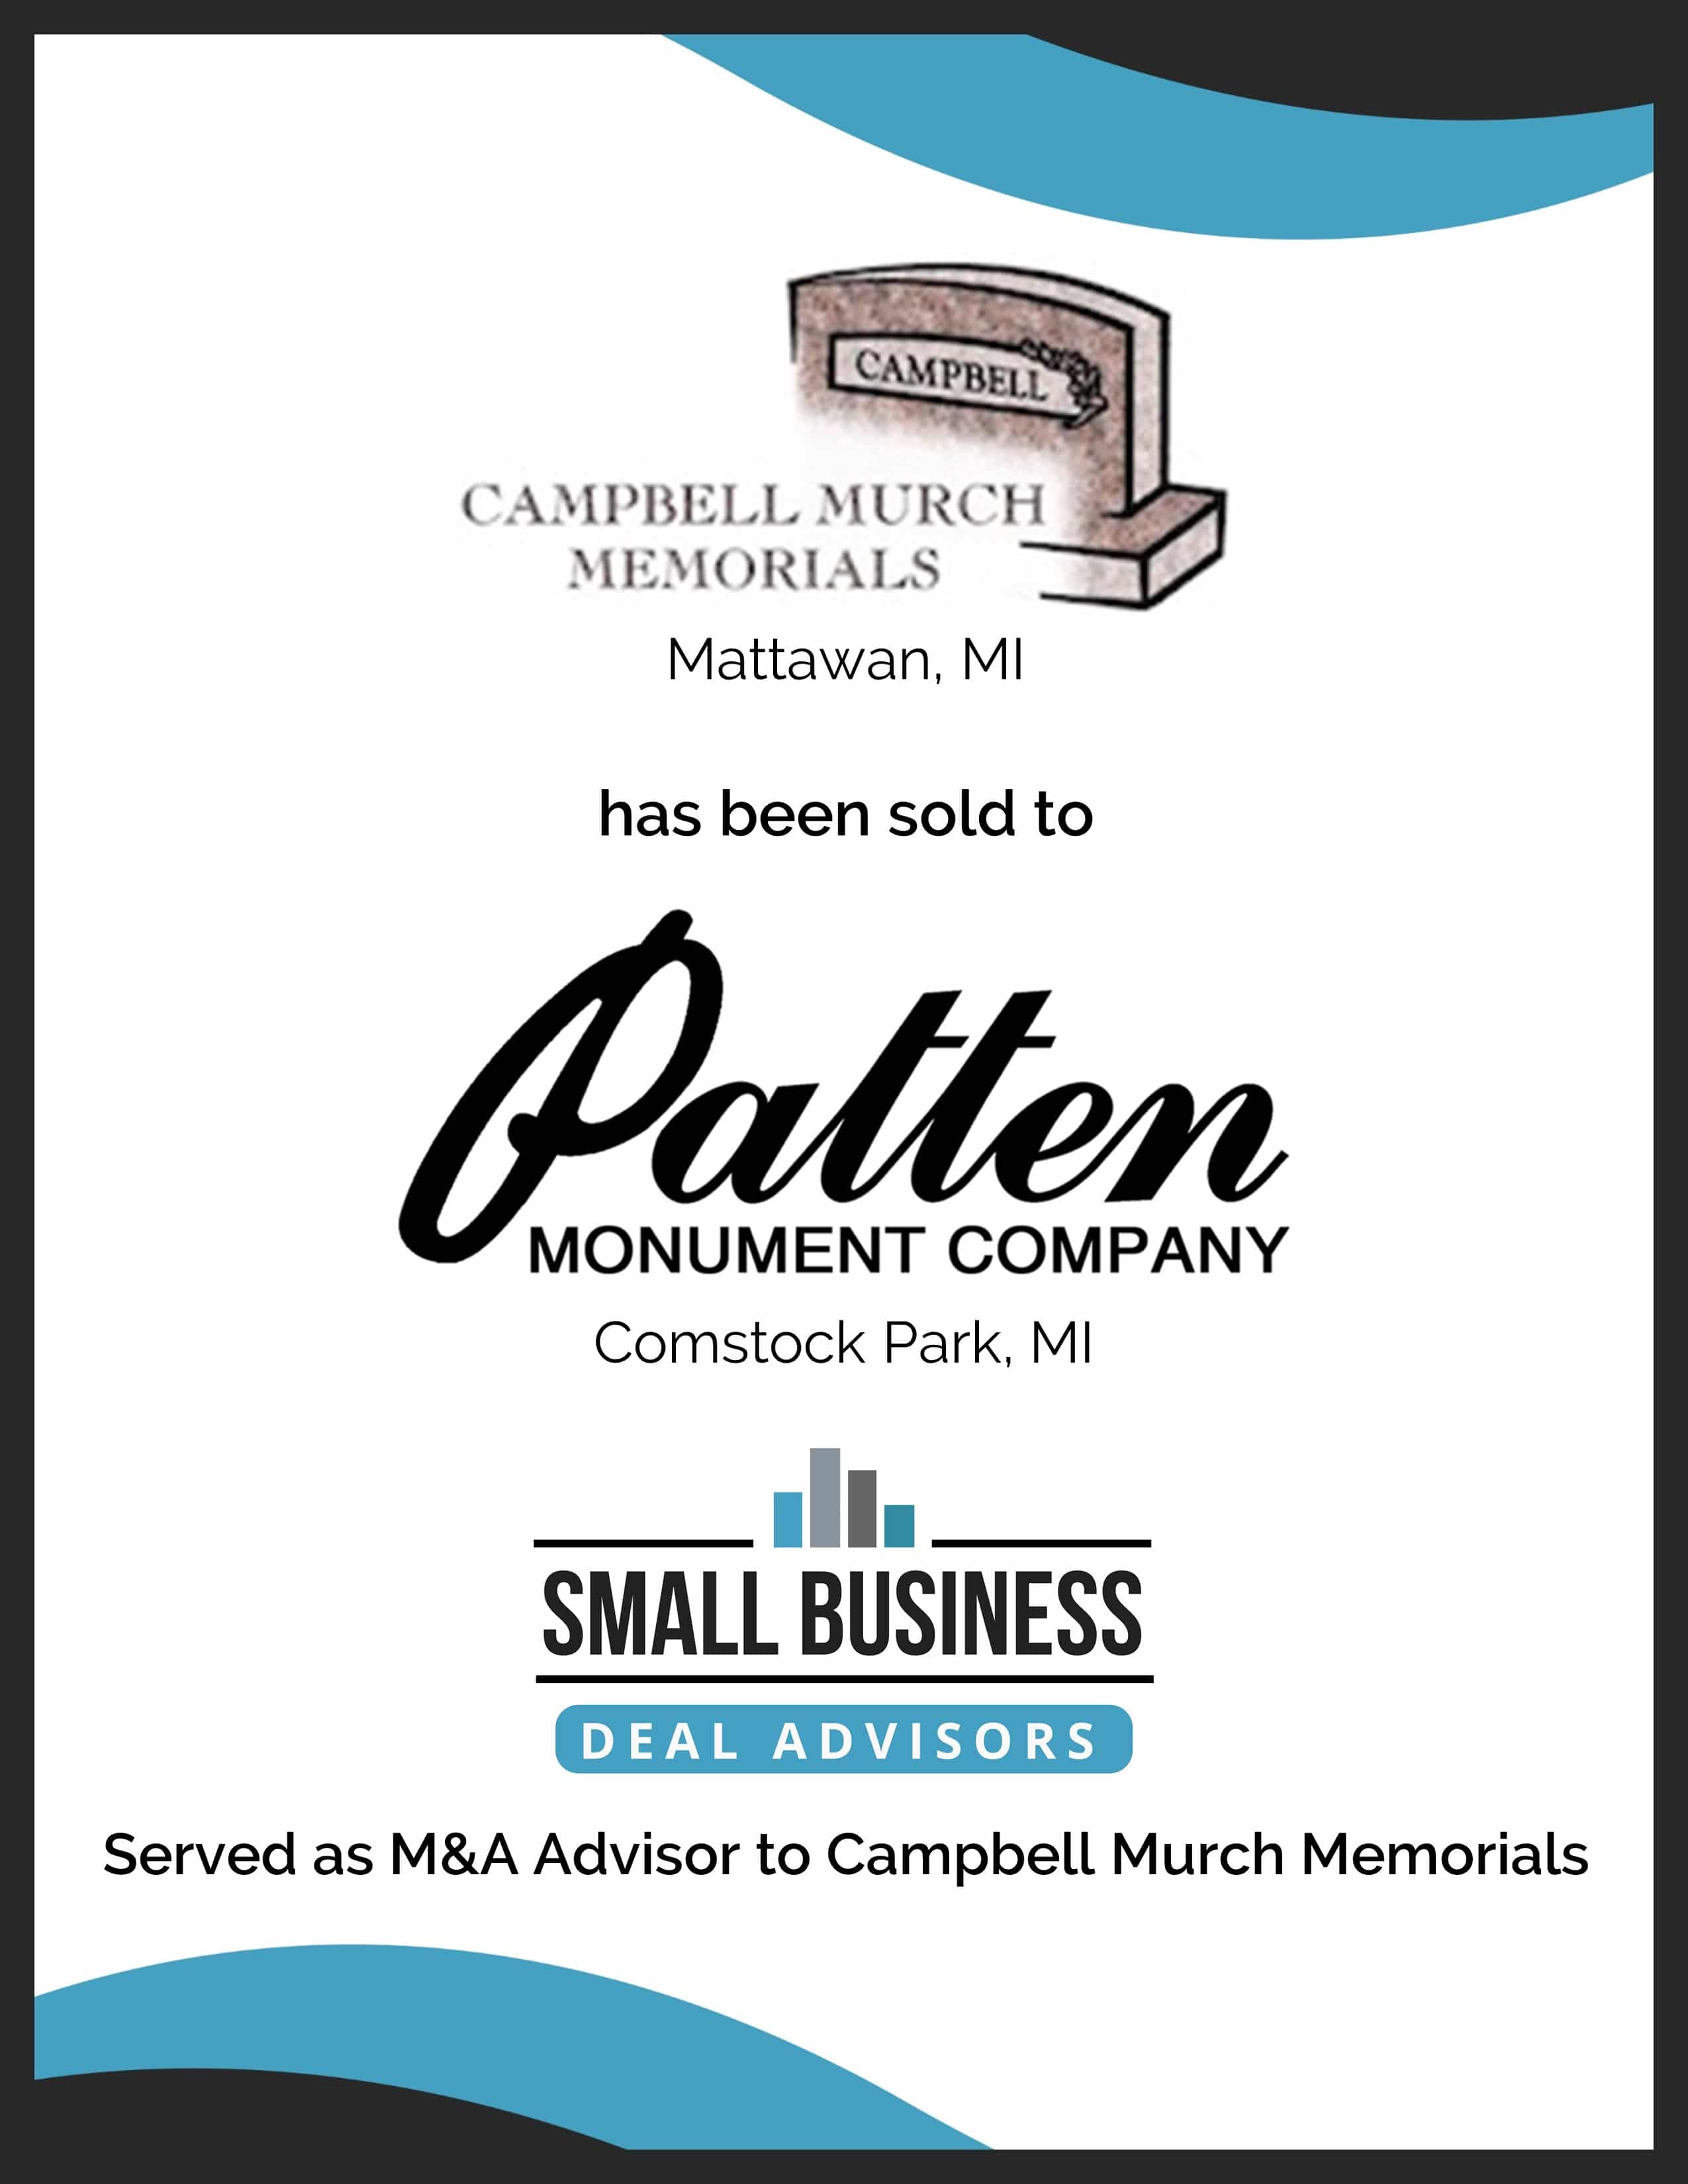 Campbell Murch Memorials Acquired by Patten Monument